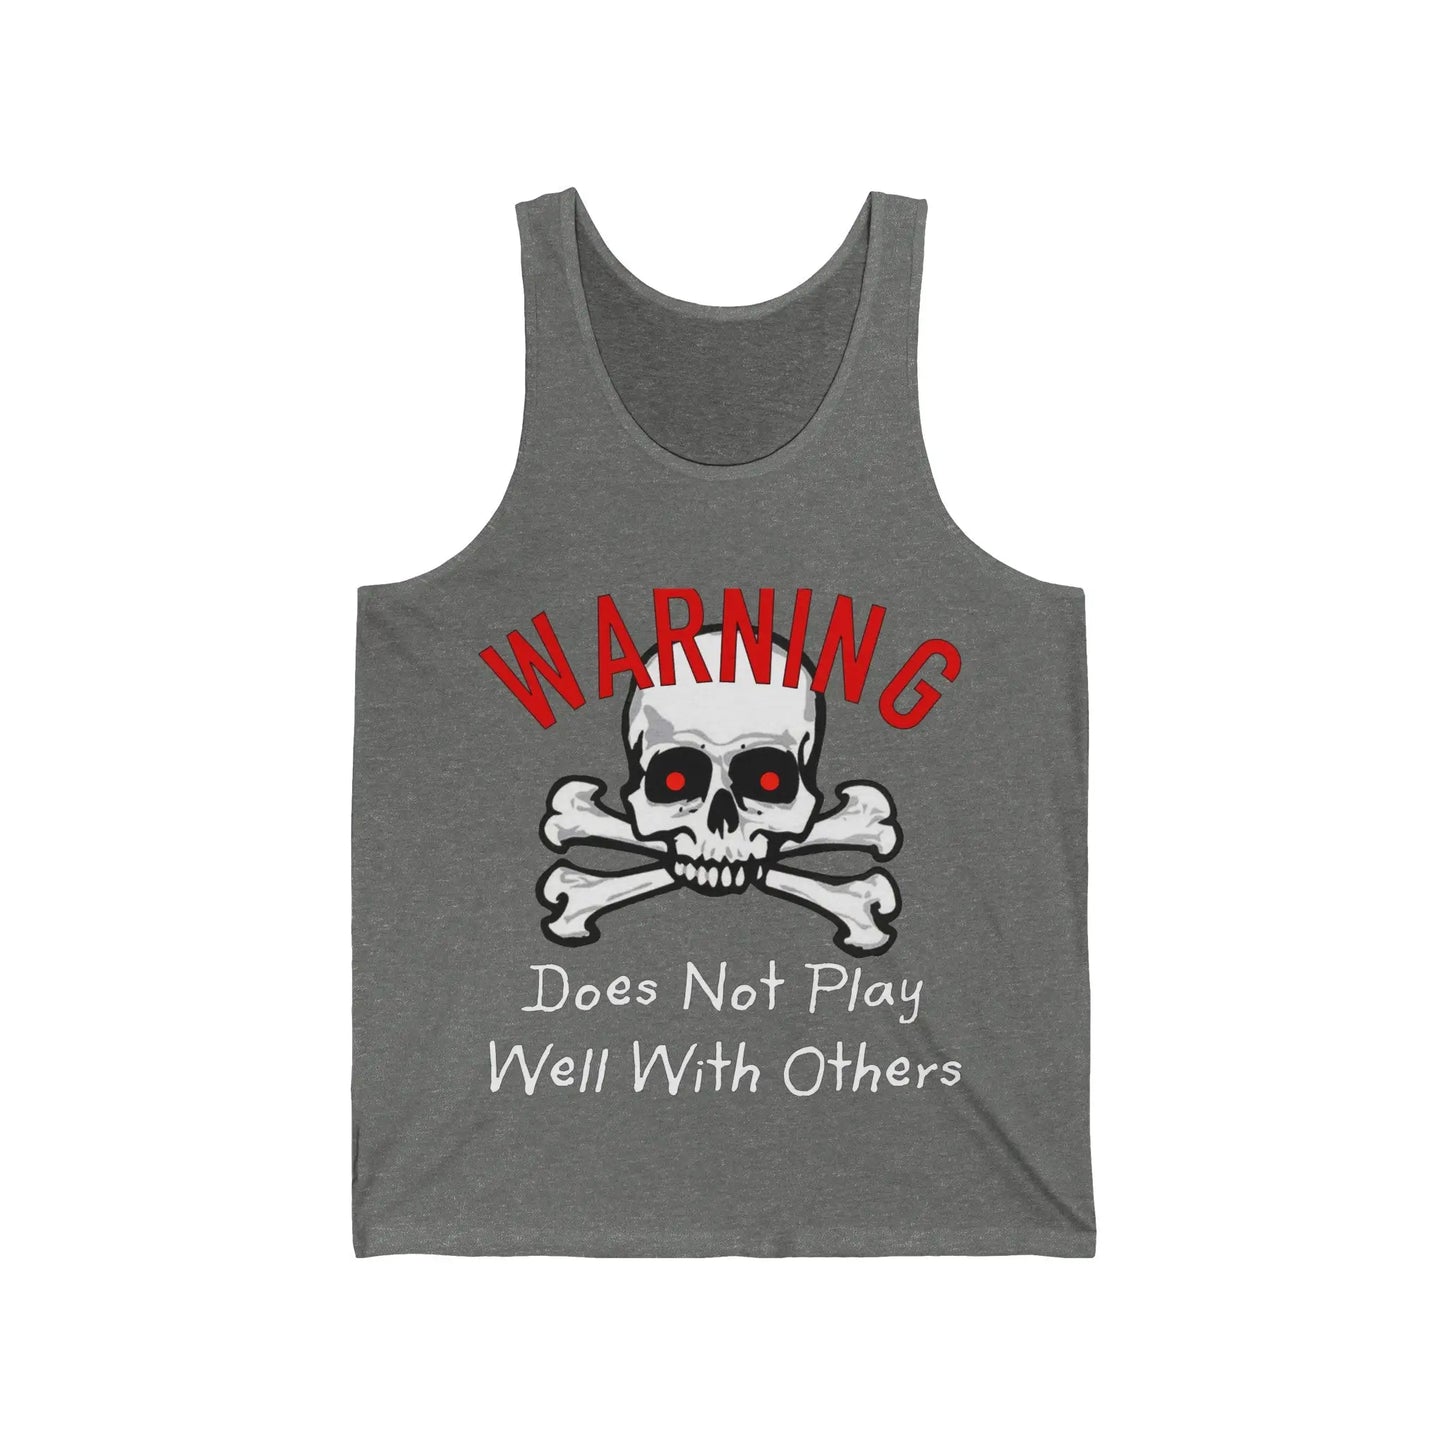 Warning Does Not Play Well With Others Men's Tank - Wicked Tees